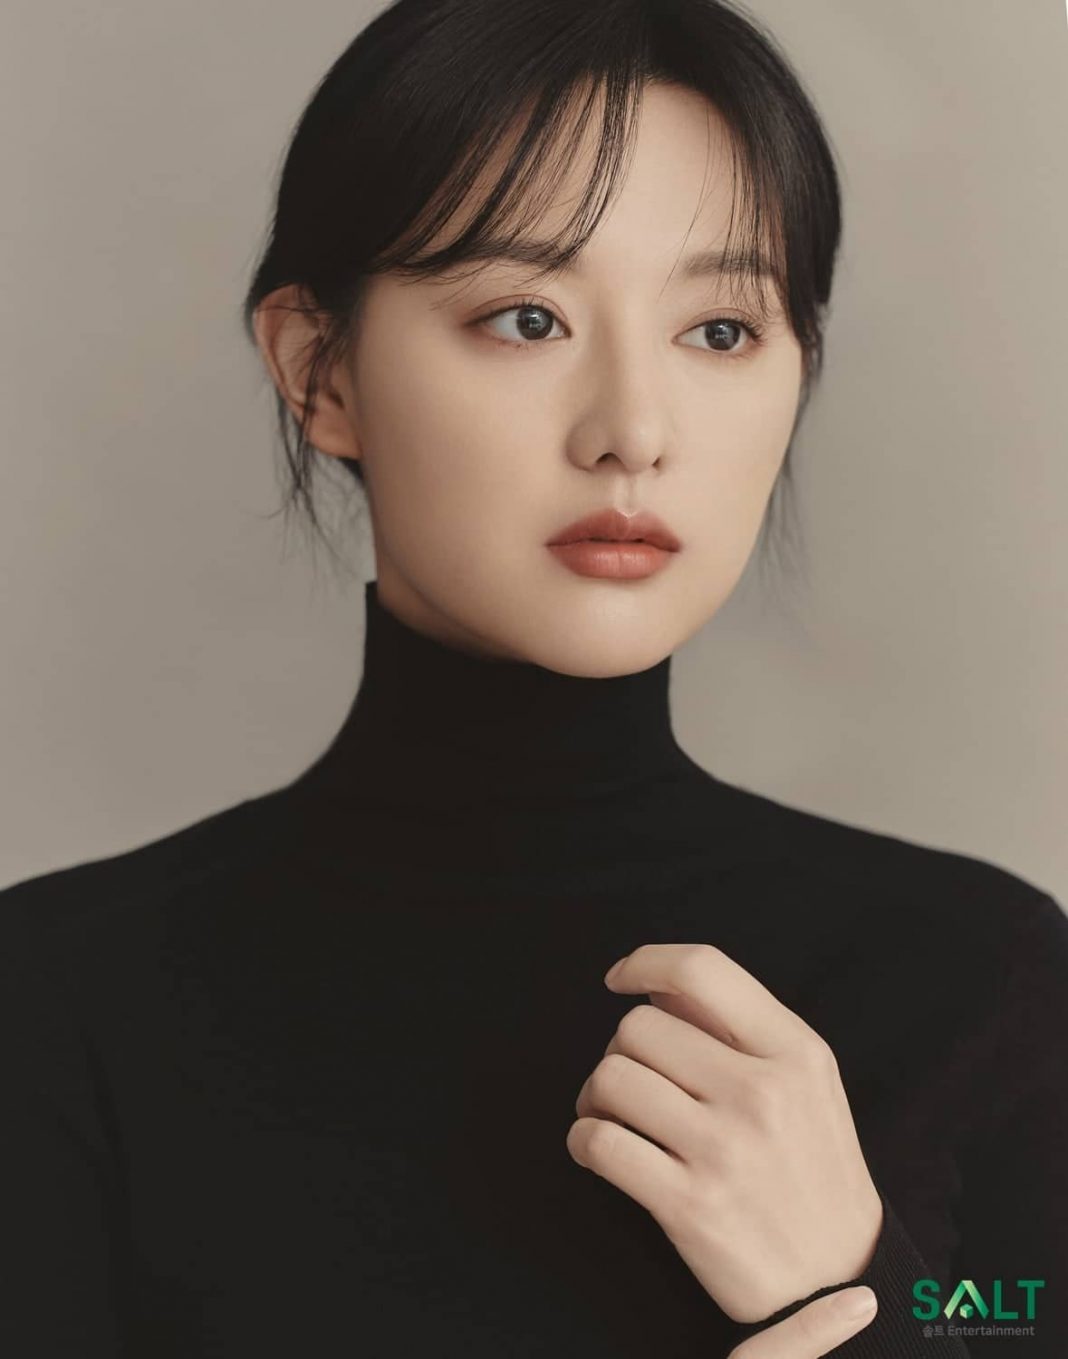 Agency Releases New Profile Photos Of Kim Ji Won Ahead Of Her